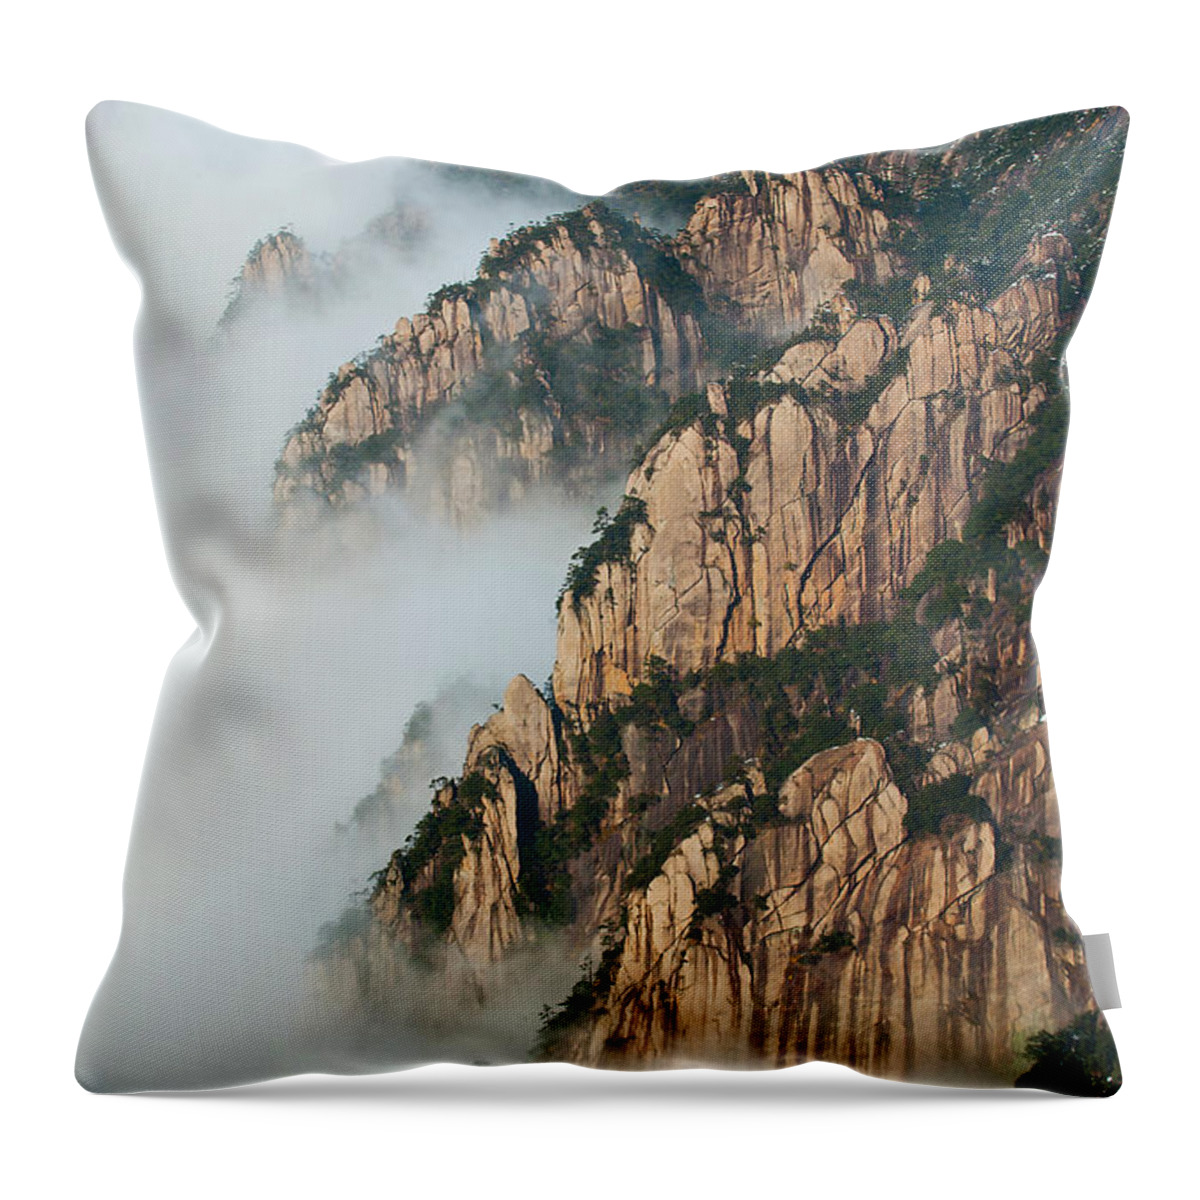 Scenics Throw Pillow featuring the photograph Yellow Mountain In Fog by Photo By Prasit Chansareekorn